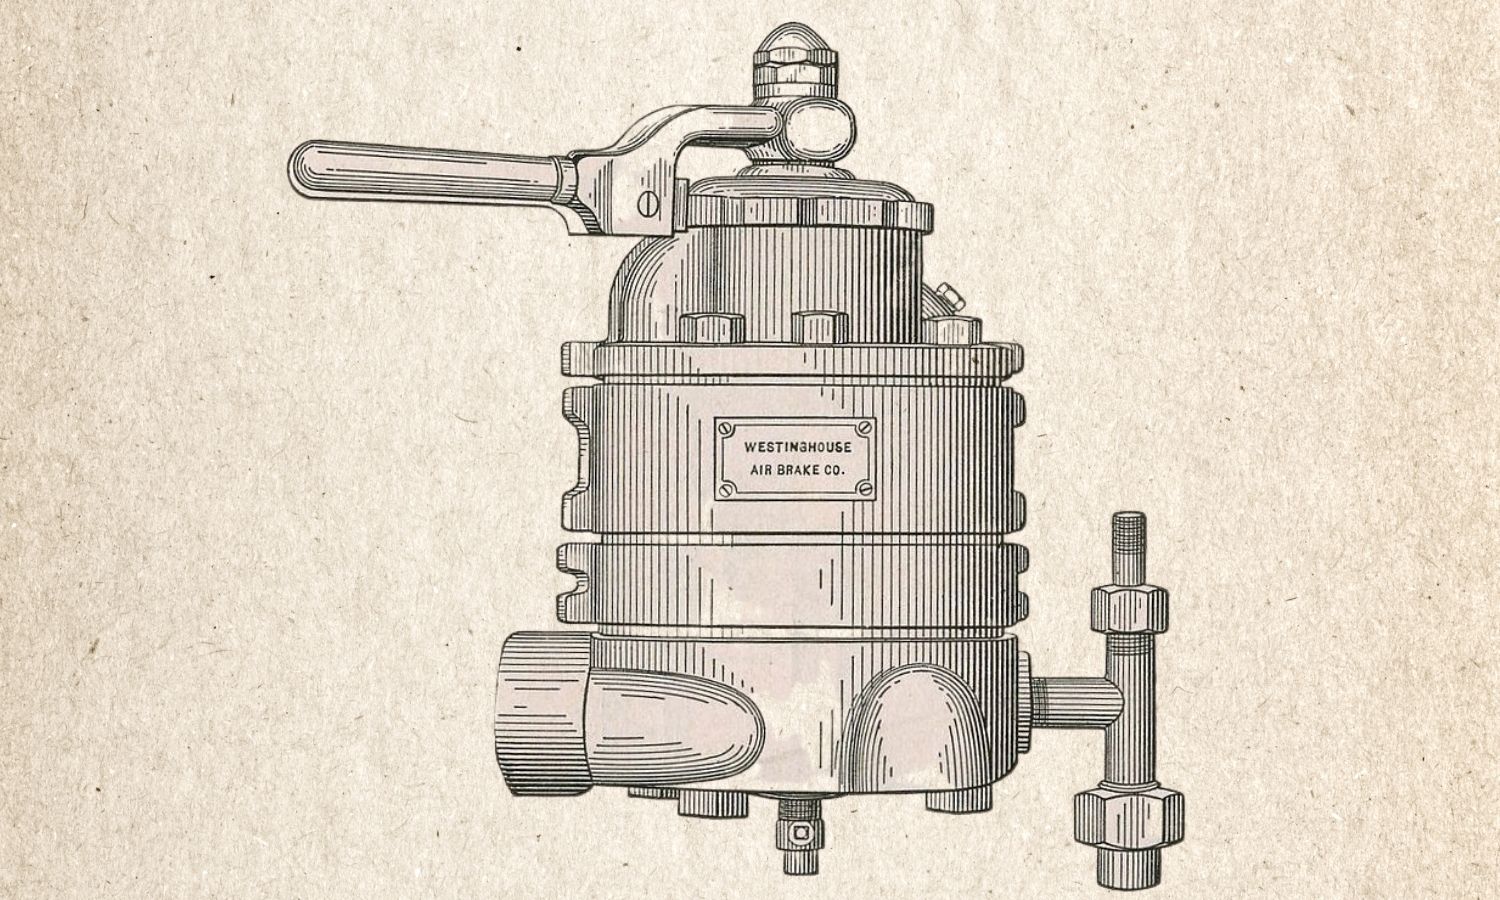 OTD in 1869: George Westinghouse Jr. patented steam power brake devices in the US.